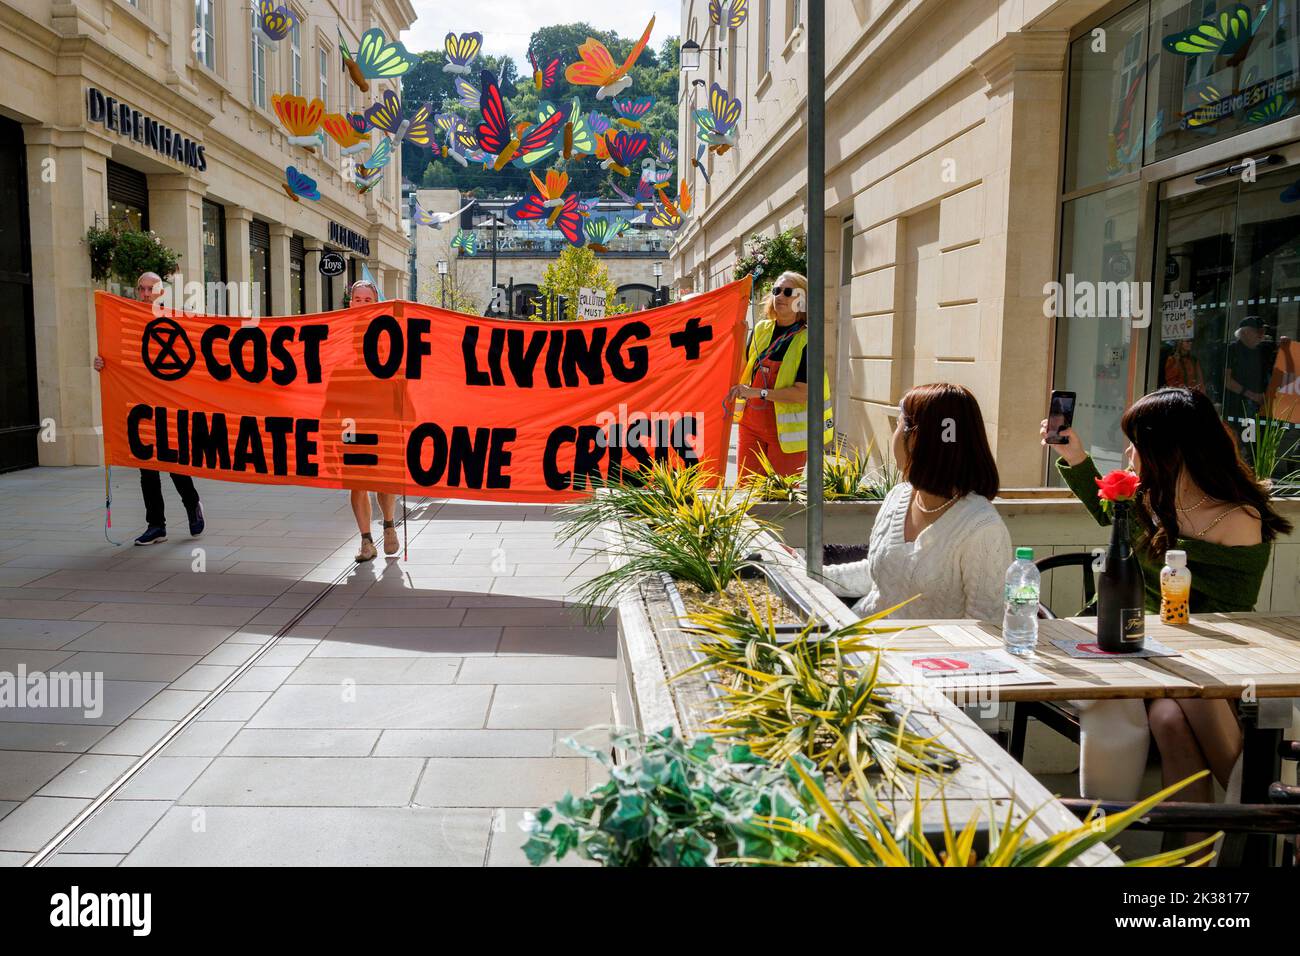 Bath, UK. 25th Sep, 2022. With PM Liz Truss signalling an acceleration of oil and gas extraction in the UK shoppers enjoying a drink look on as climate change protesters take part in a protest march through the centre of Bath. The protest organised by Extinction Rebellion was held in order to highlight how the cost of living crisis and the climate crisis are interlinked. Credit: Lynchpics/Alamy Live News Stock Photo